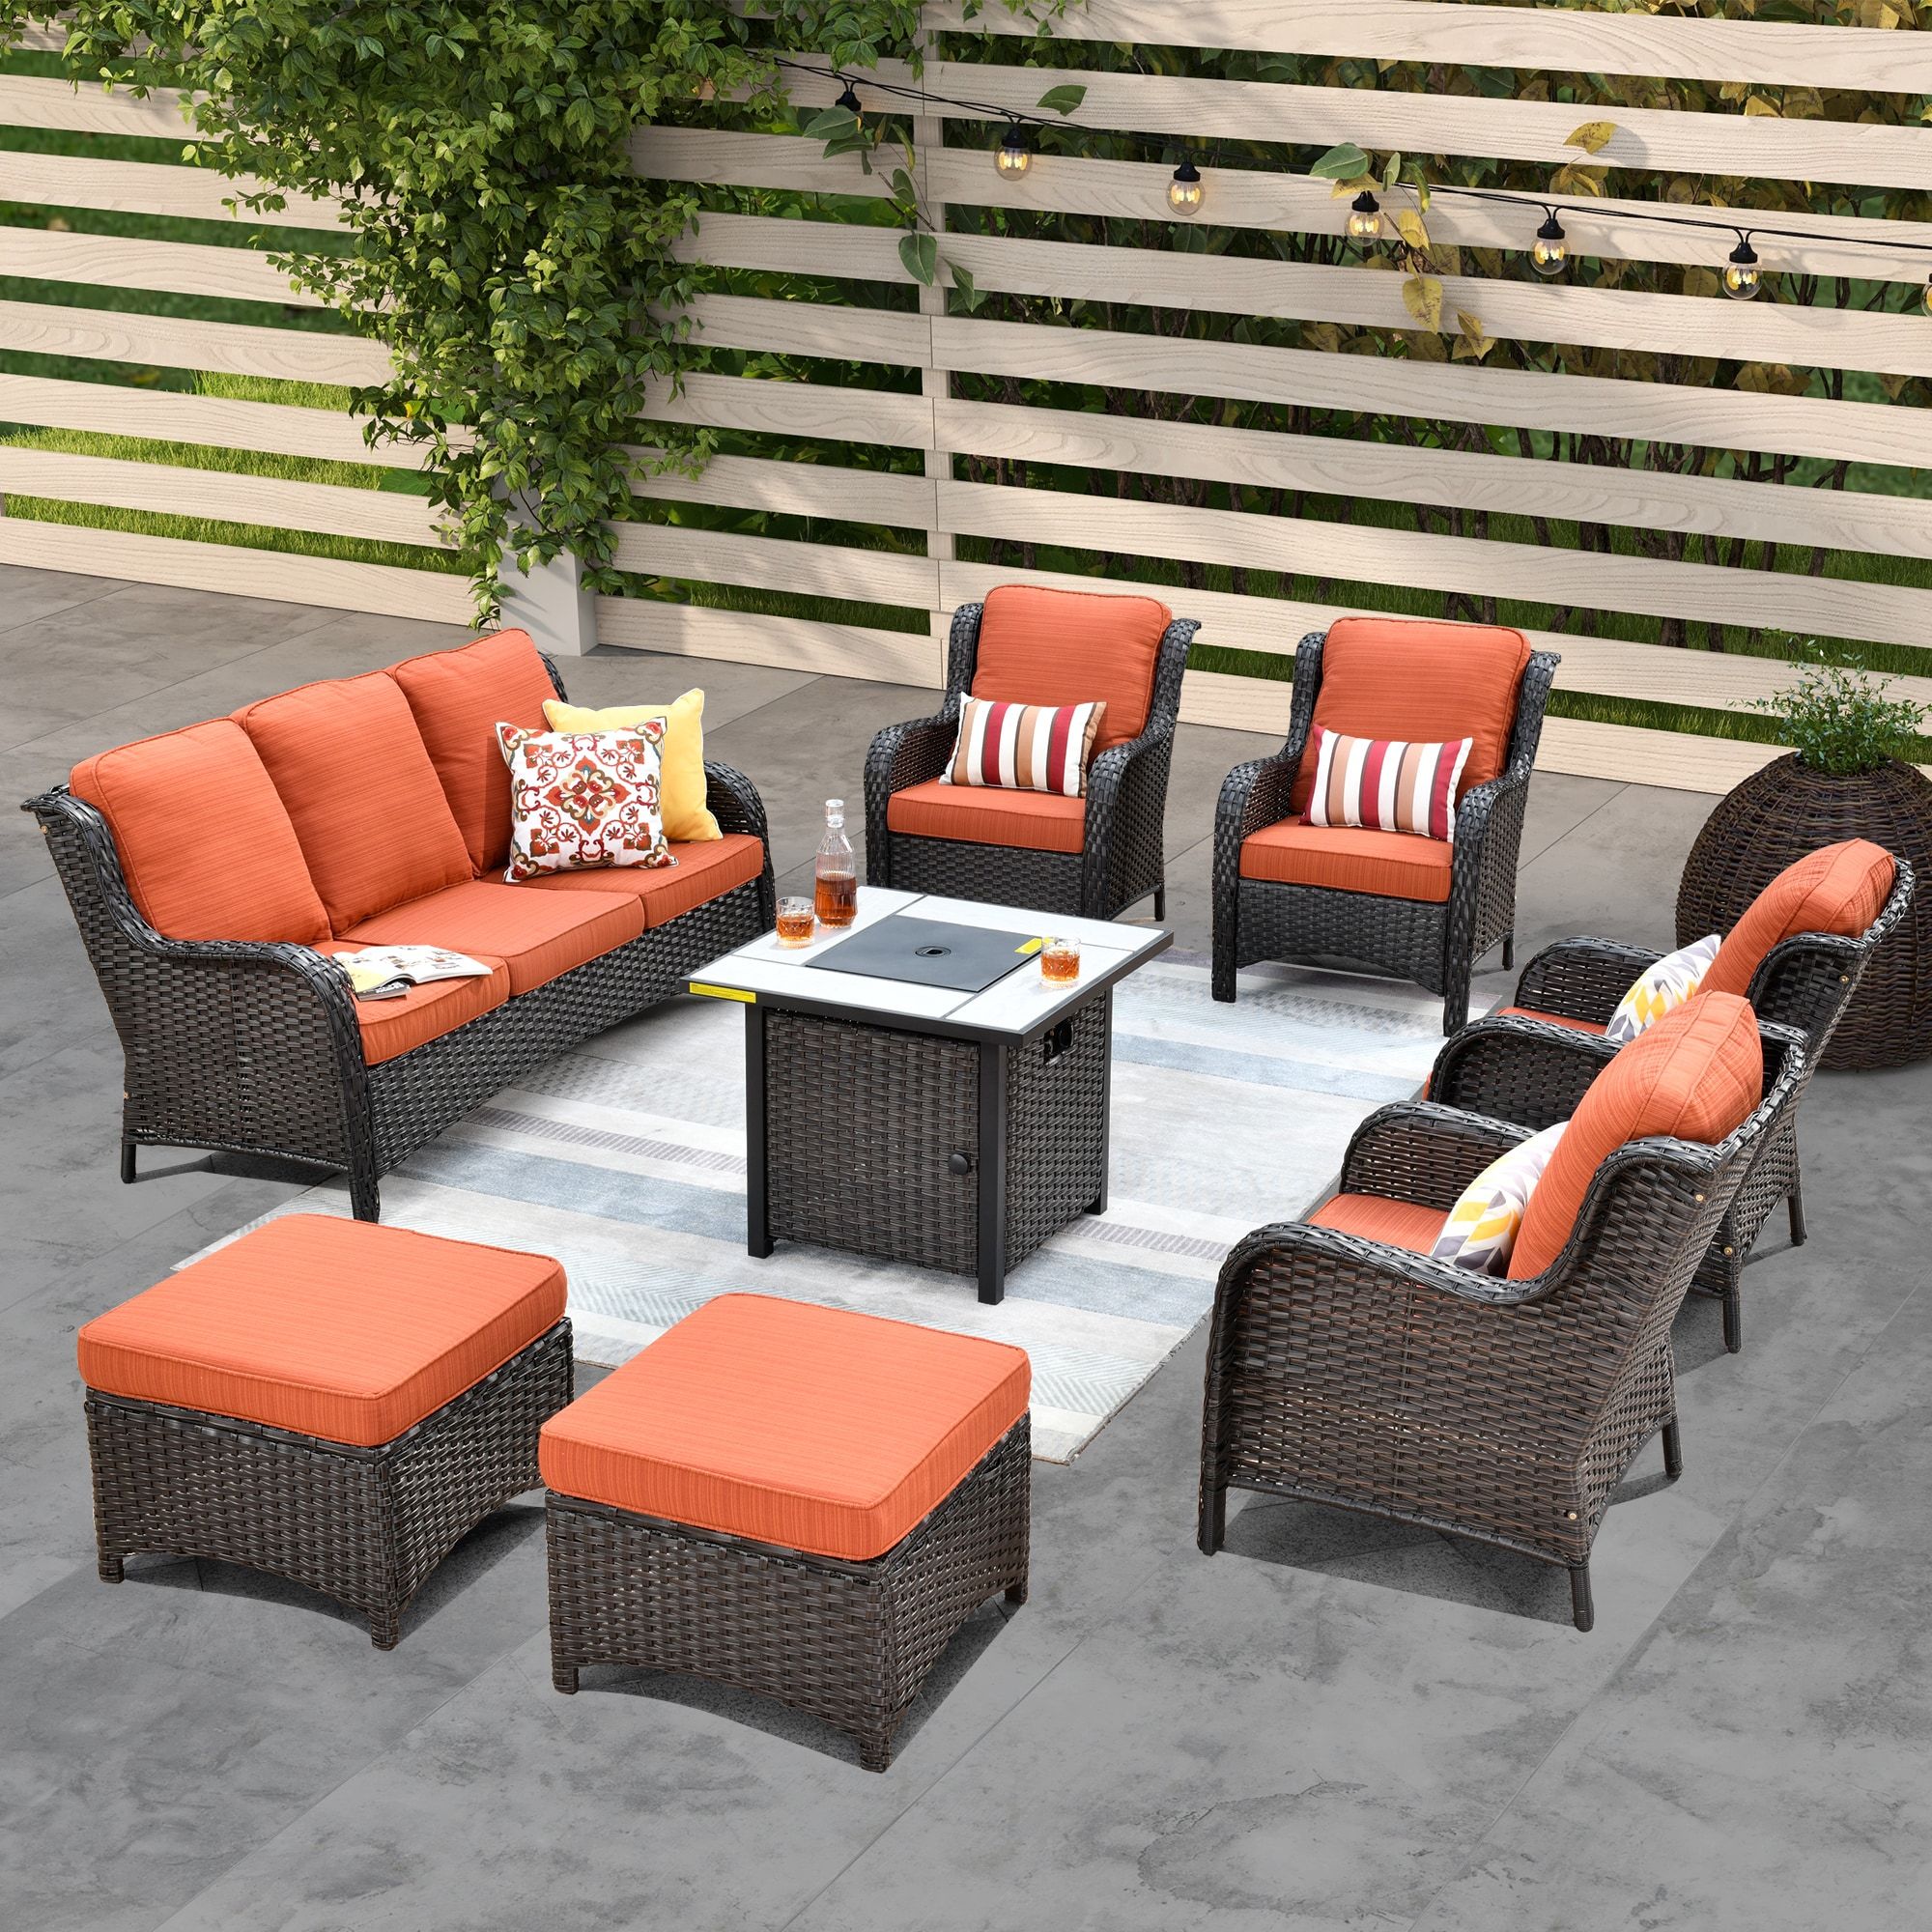 Ovios 8 Piece Patio Furniture Sets Rattan Wicker Chair Sectional Sofa Deep  Seating Conversation Set With Gas Fire Pit Table (brown Wicker,orange Red  Cushions) In The Patio Conversation Sets Department At Lowes With Fire Pit Table Wicker Sectional Sofa Conversation Set (View 14 of 15)